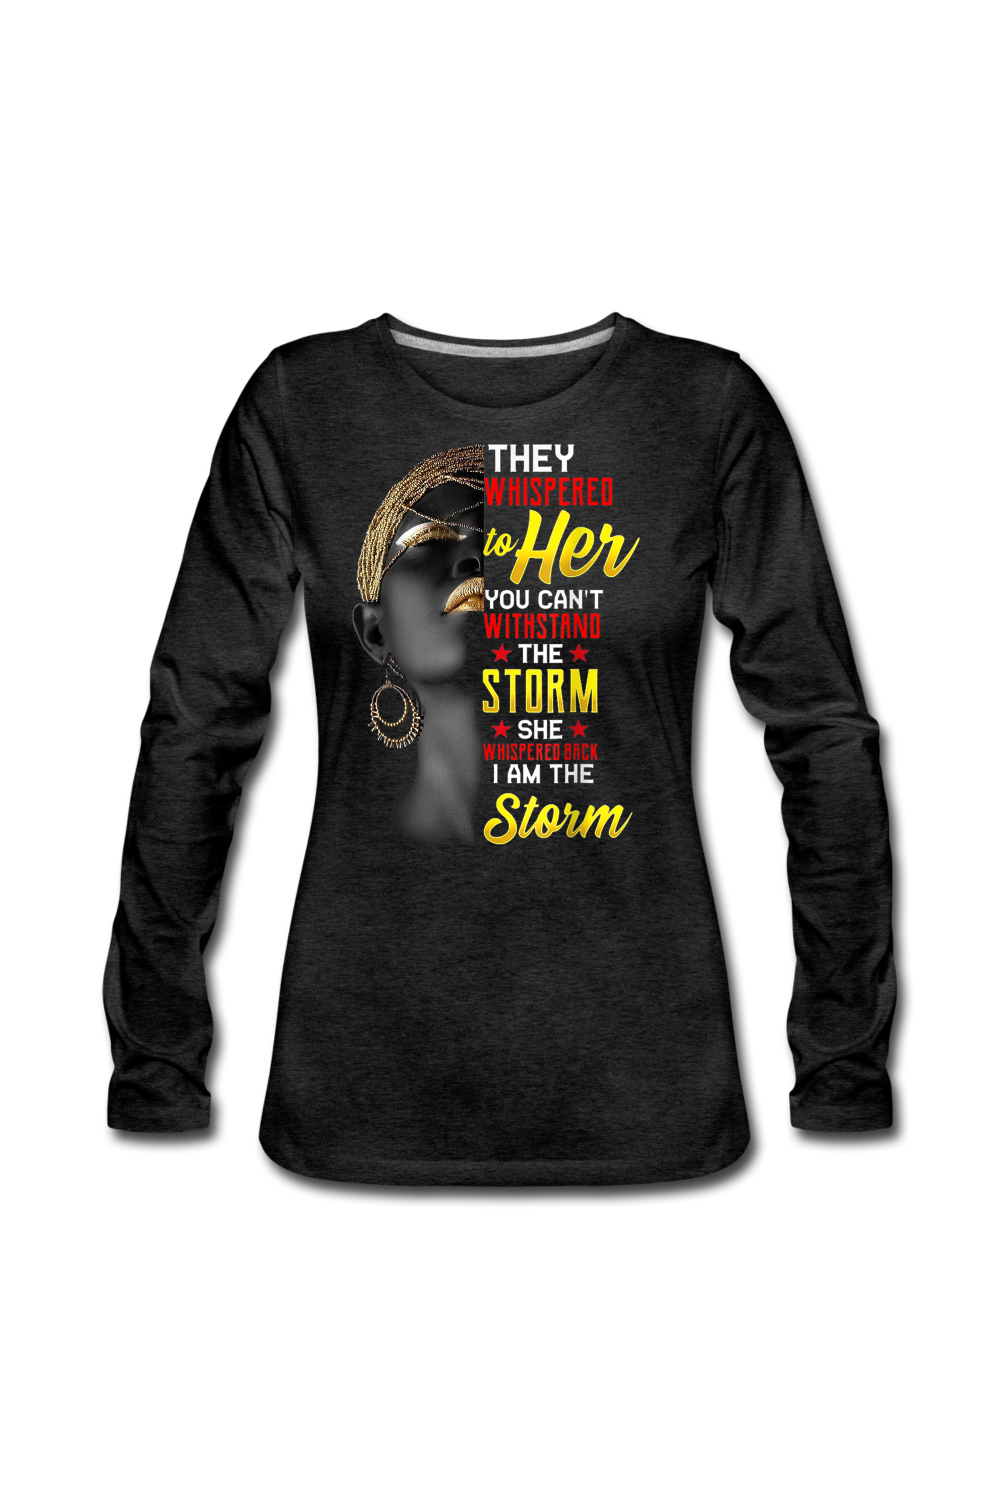 Women's They Whispered Long Sleeve T-Shirt - NicholesGifts